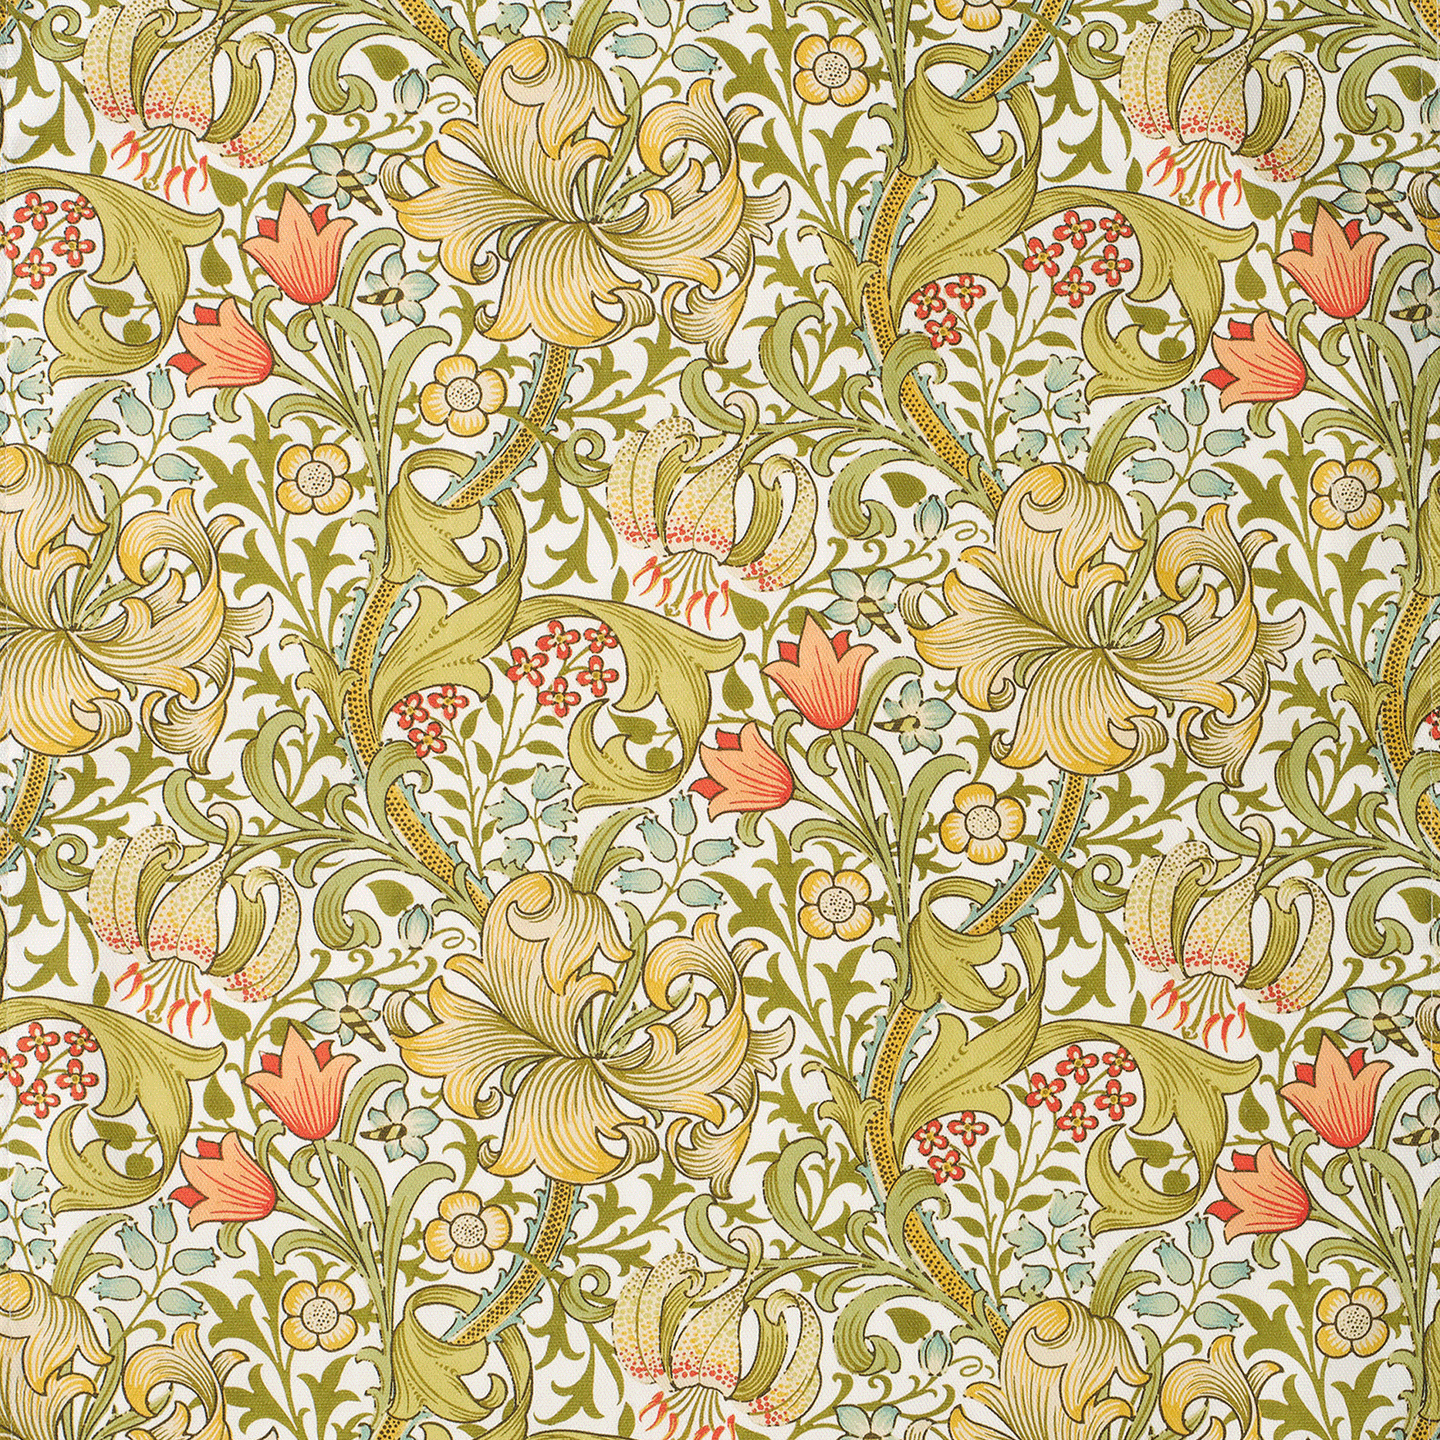 Golden Lily Printed Cotton Fabric 153cm Wide